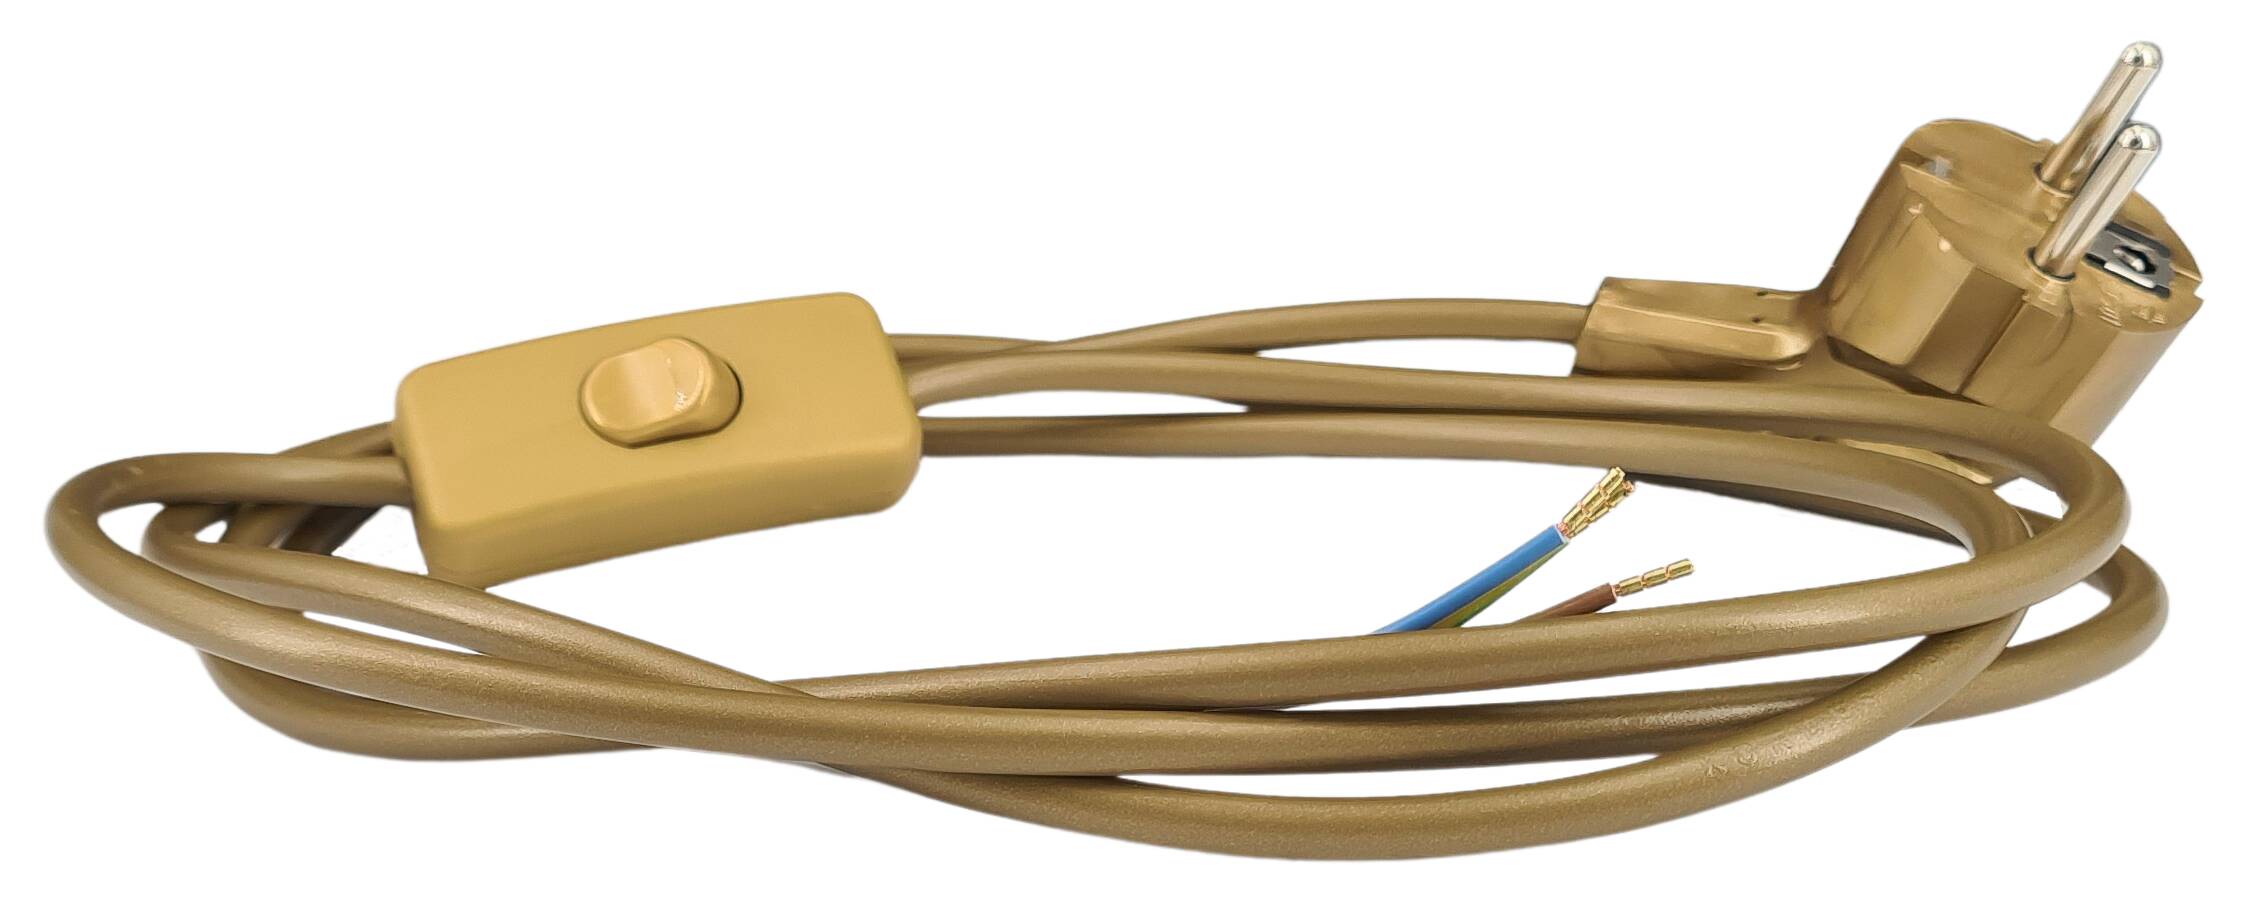 cord-set 3G 0,75/2000/800 with schuko angled plug and handswitch gold